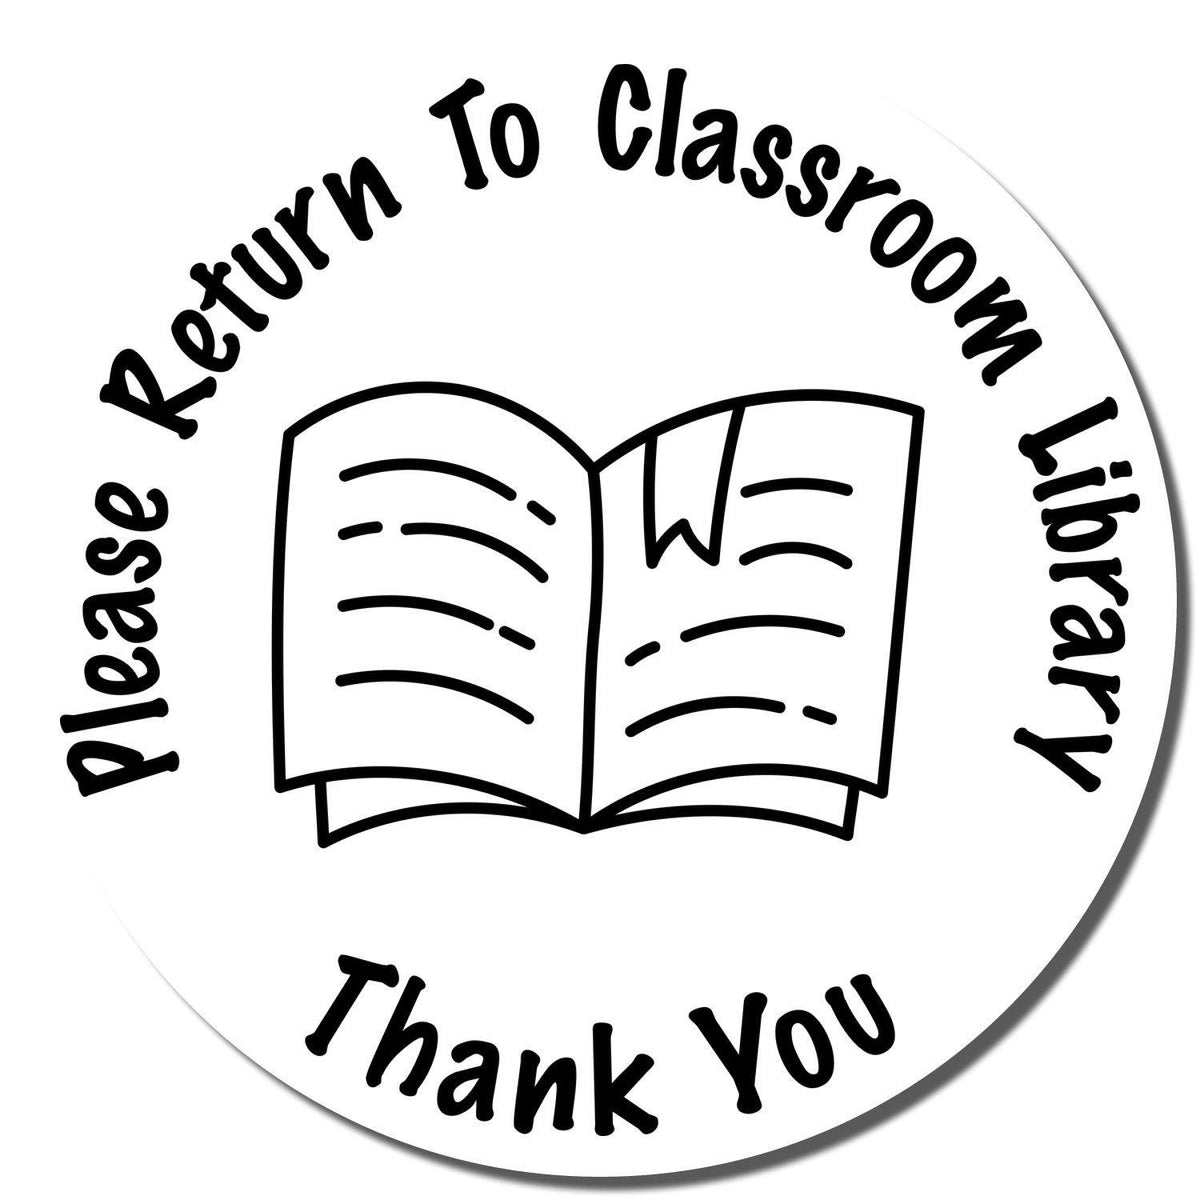 Round Please Return to Classroom Library Rubber Stamp - Engineer Seal Stamps - Brand_Acorn, Impression Size_Small, Stamp Type_Regular Stamp, Type of Use_Teacher